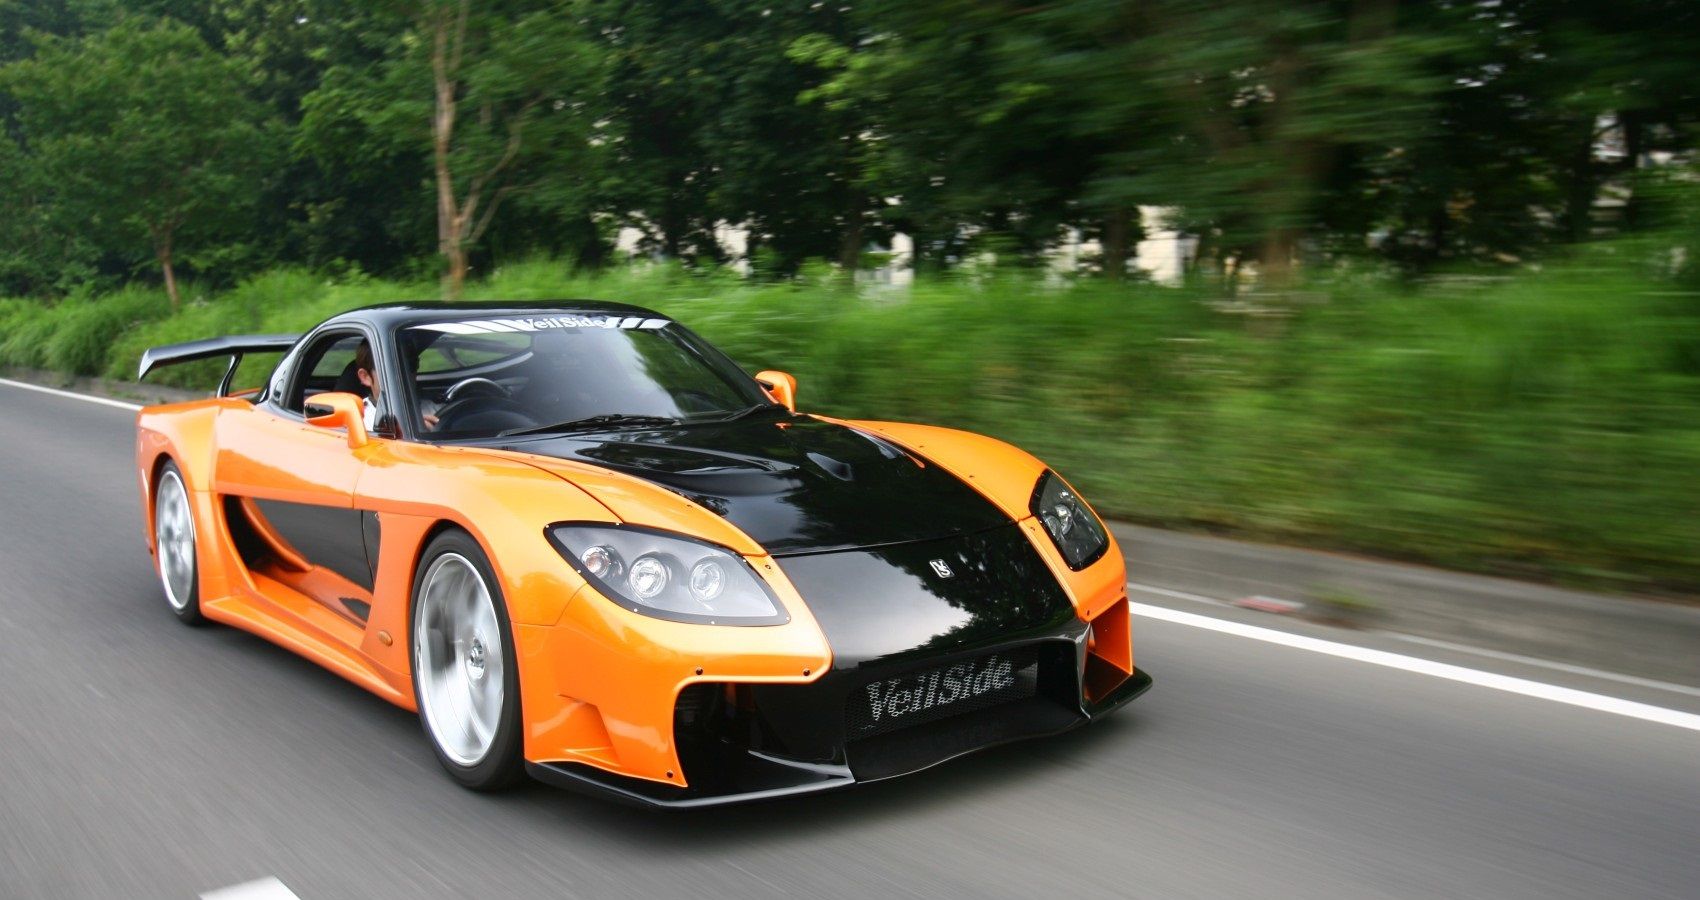 These Are The 10 Most Expensive Cars Featured In F&F: Tokyo Drift